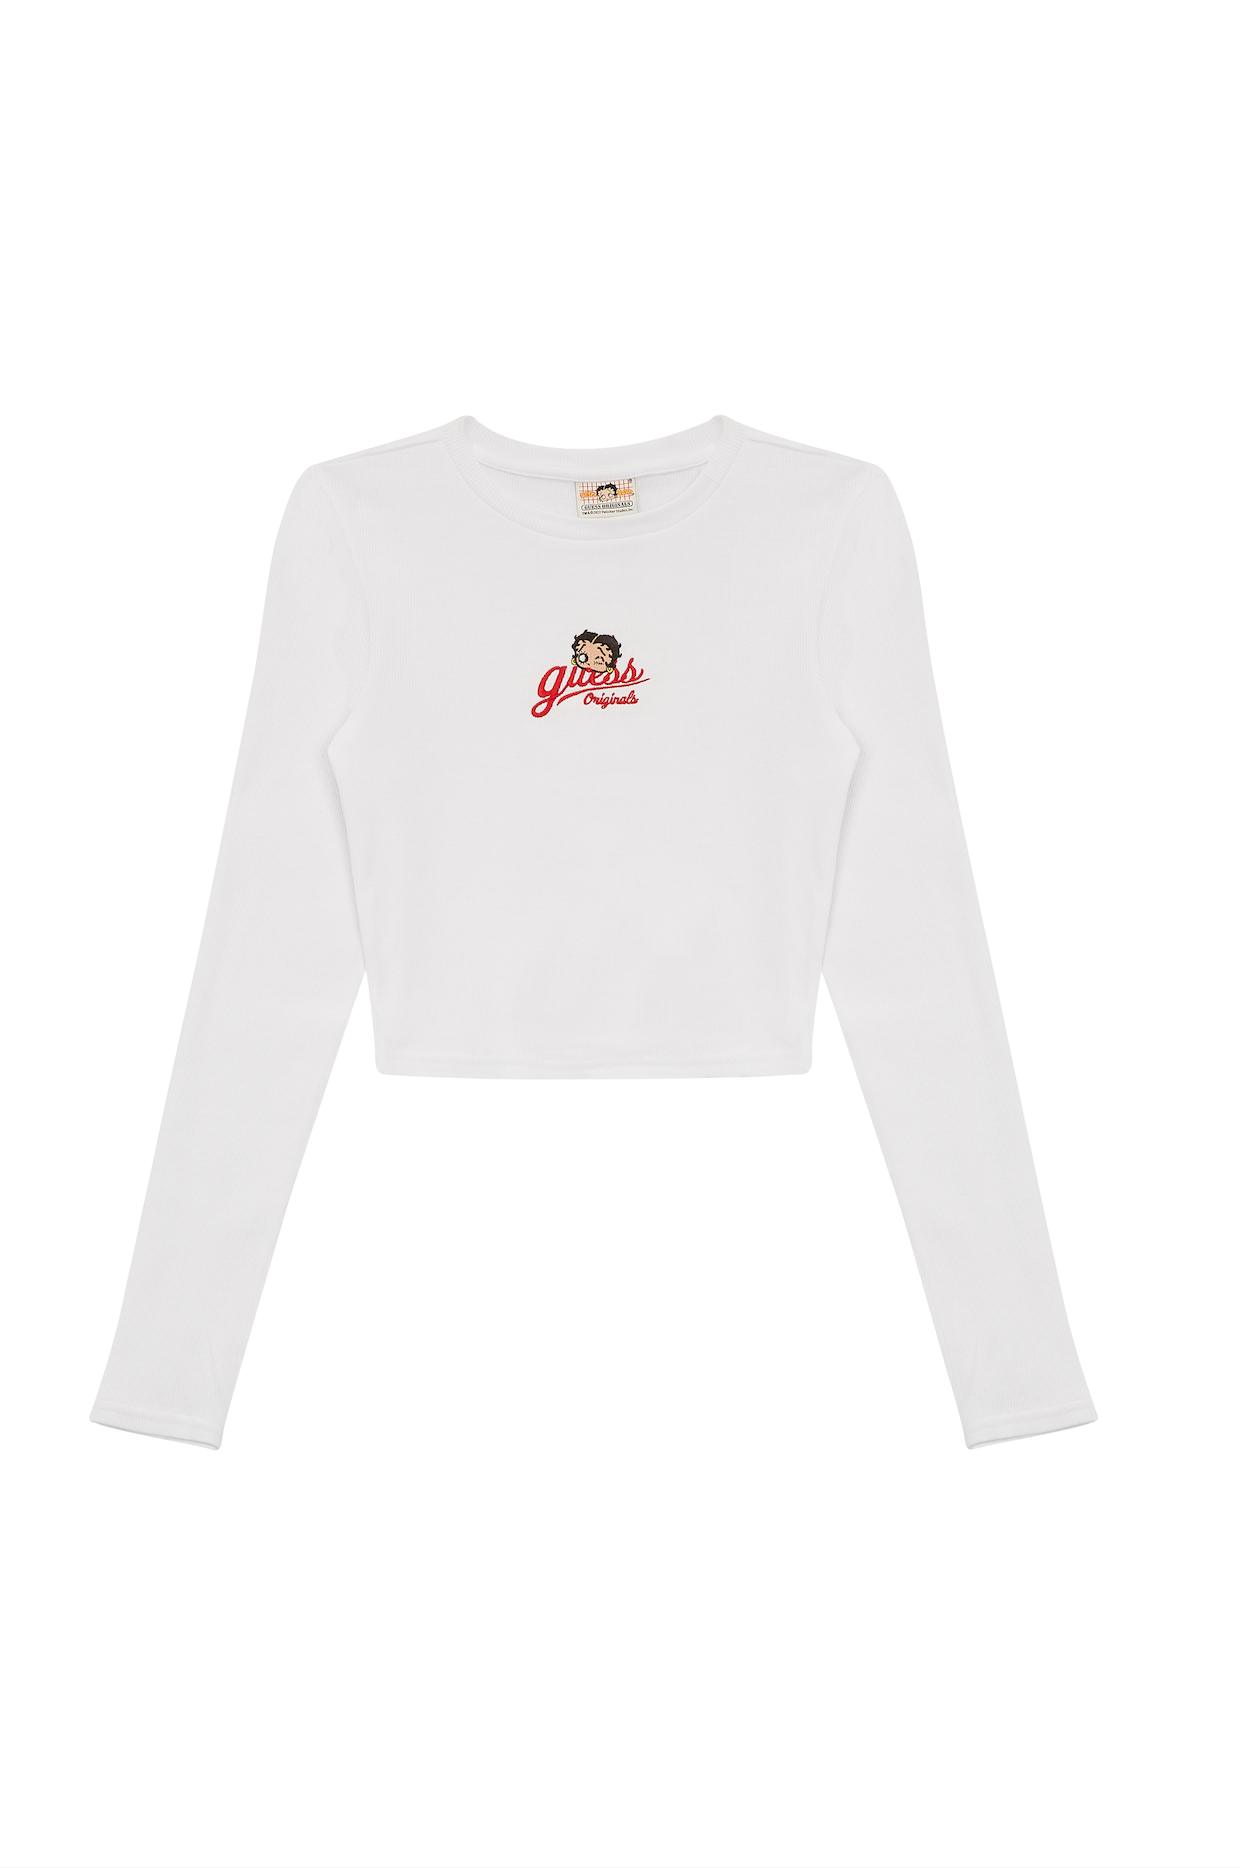 A long-sleeve top with a logo of Betty Boop in the center